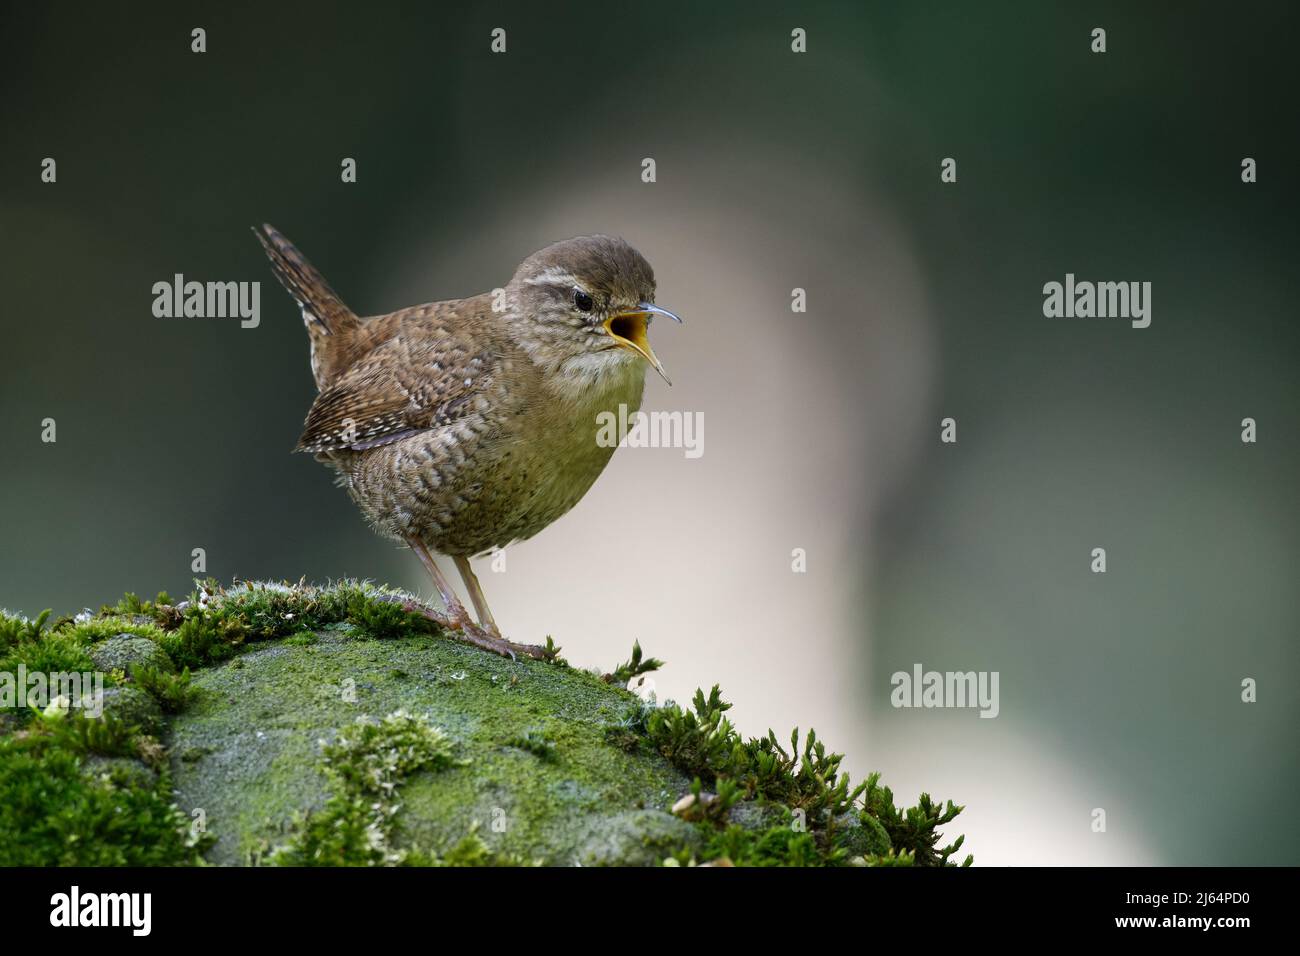 wren on a mossy stone singing with wide open beak Stock Photo